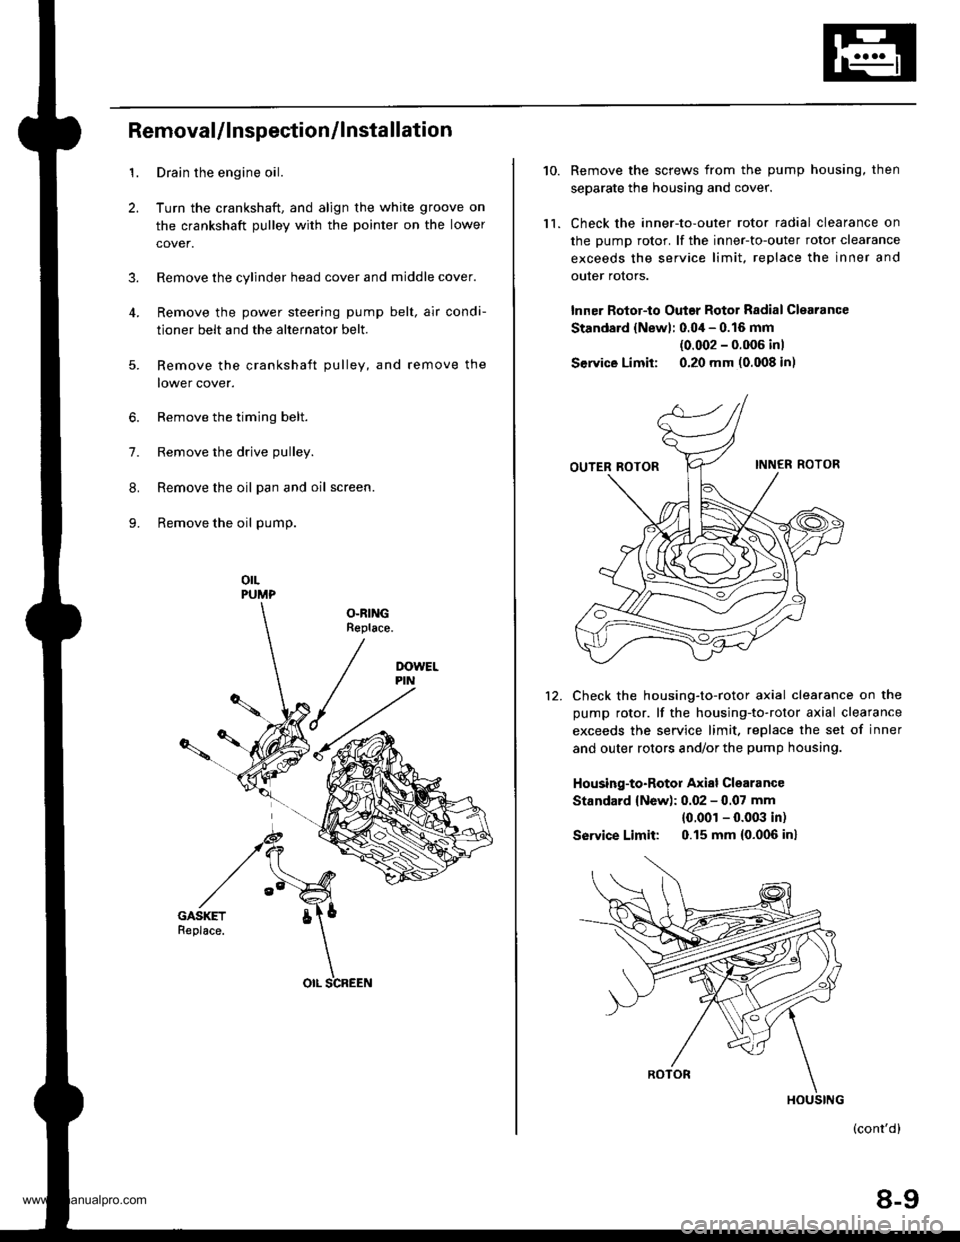 HONDA CR-V 2000 RD1-RD3 / 1.G Owners Guide 
1.
2.
3.
RemovaUlnspection/lnstallation
Drain the engine oil.
Turn the crankshaft, and align the white groove on
the crankshaft pulley with the pointer on the lower
cover.
Remove the cylinder head co